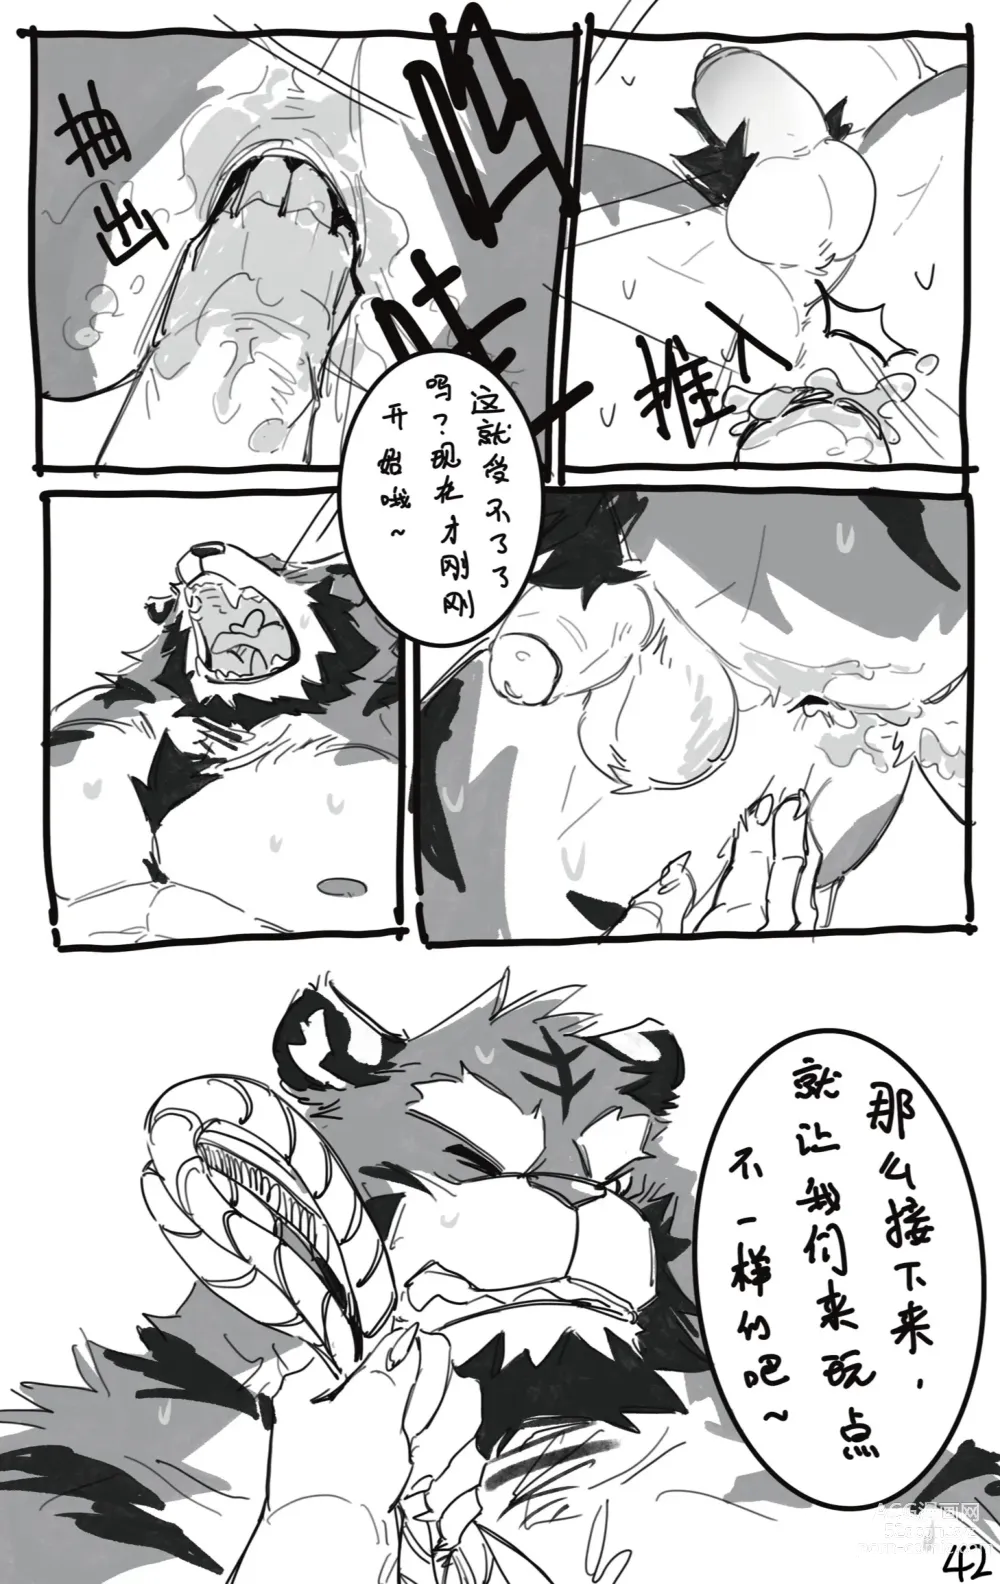 Page 44 of doujinshi OCHER - FIRST ROUND